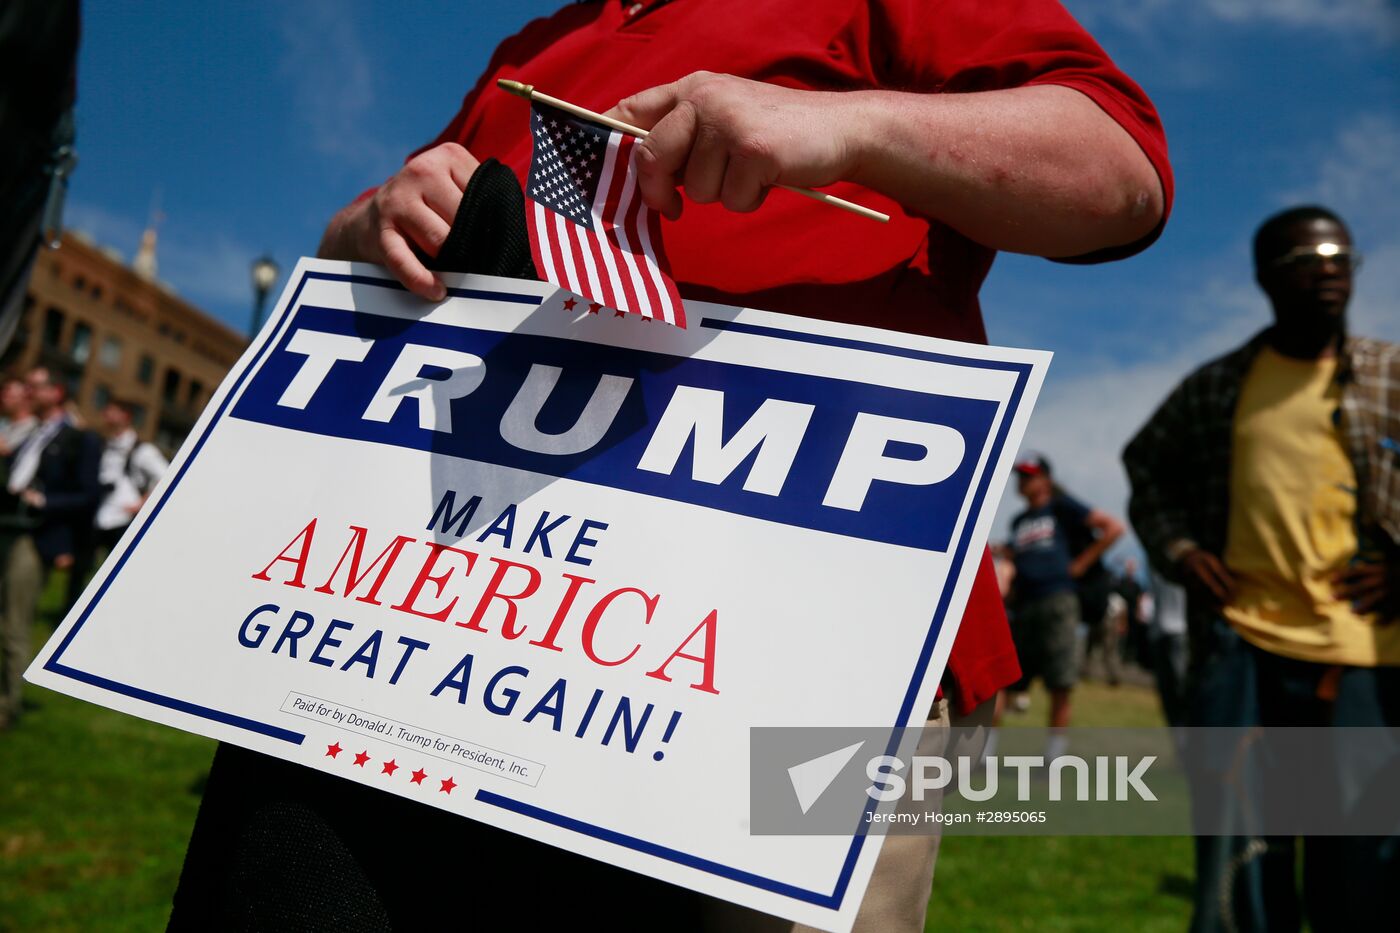 Donald Trump's supporters stage rally